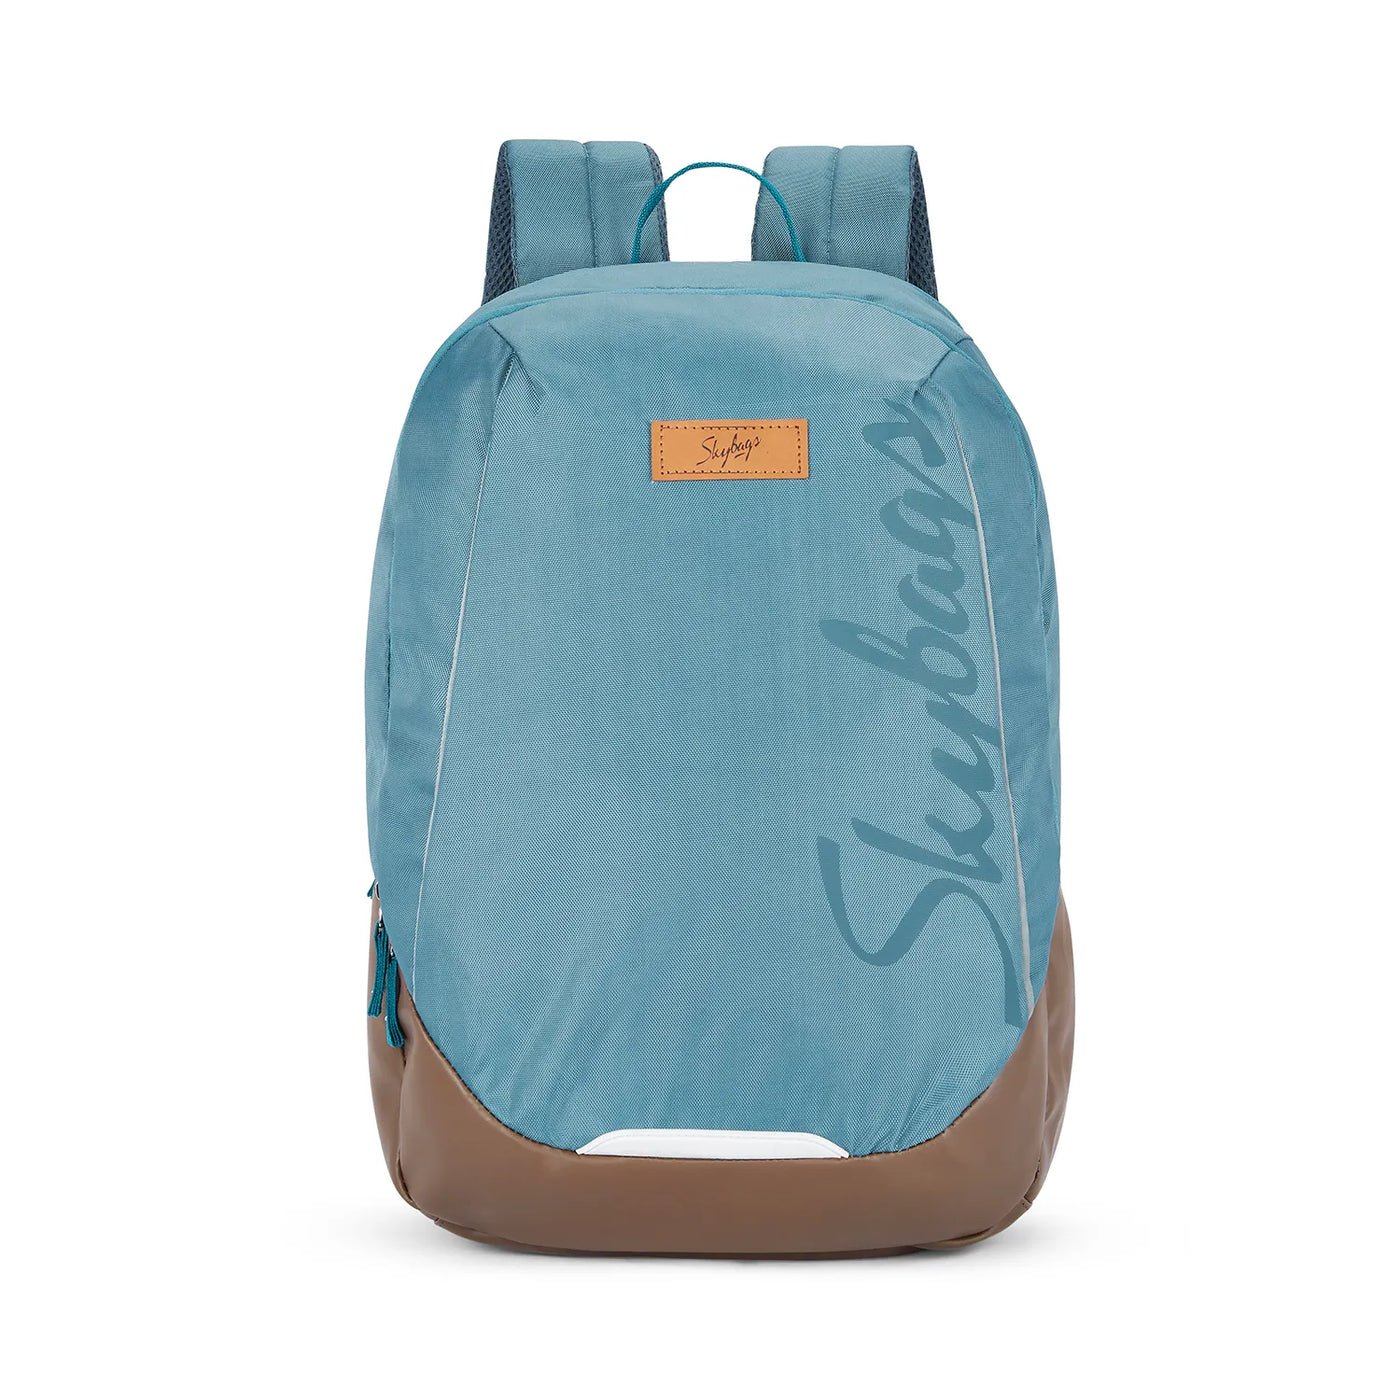 Skybags Valor NXT "01 Laptop Backpack Blue"